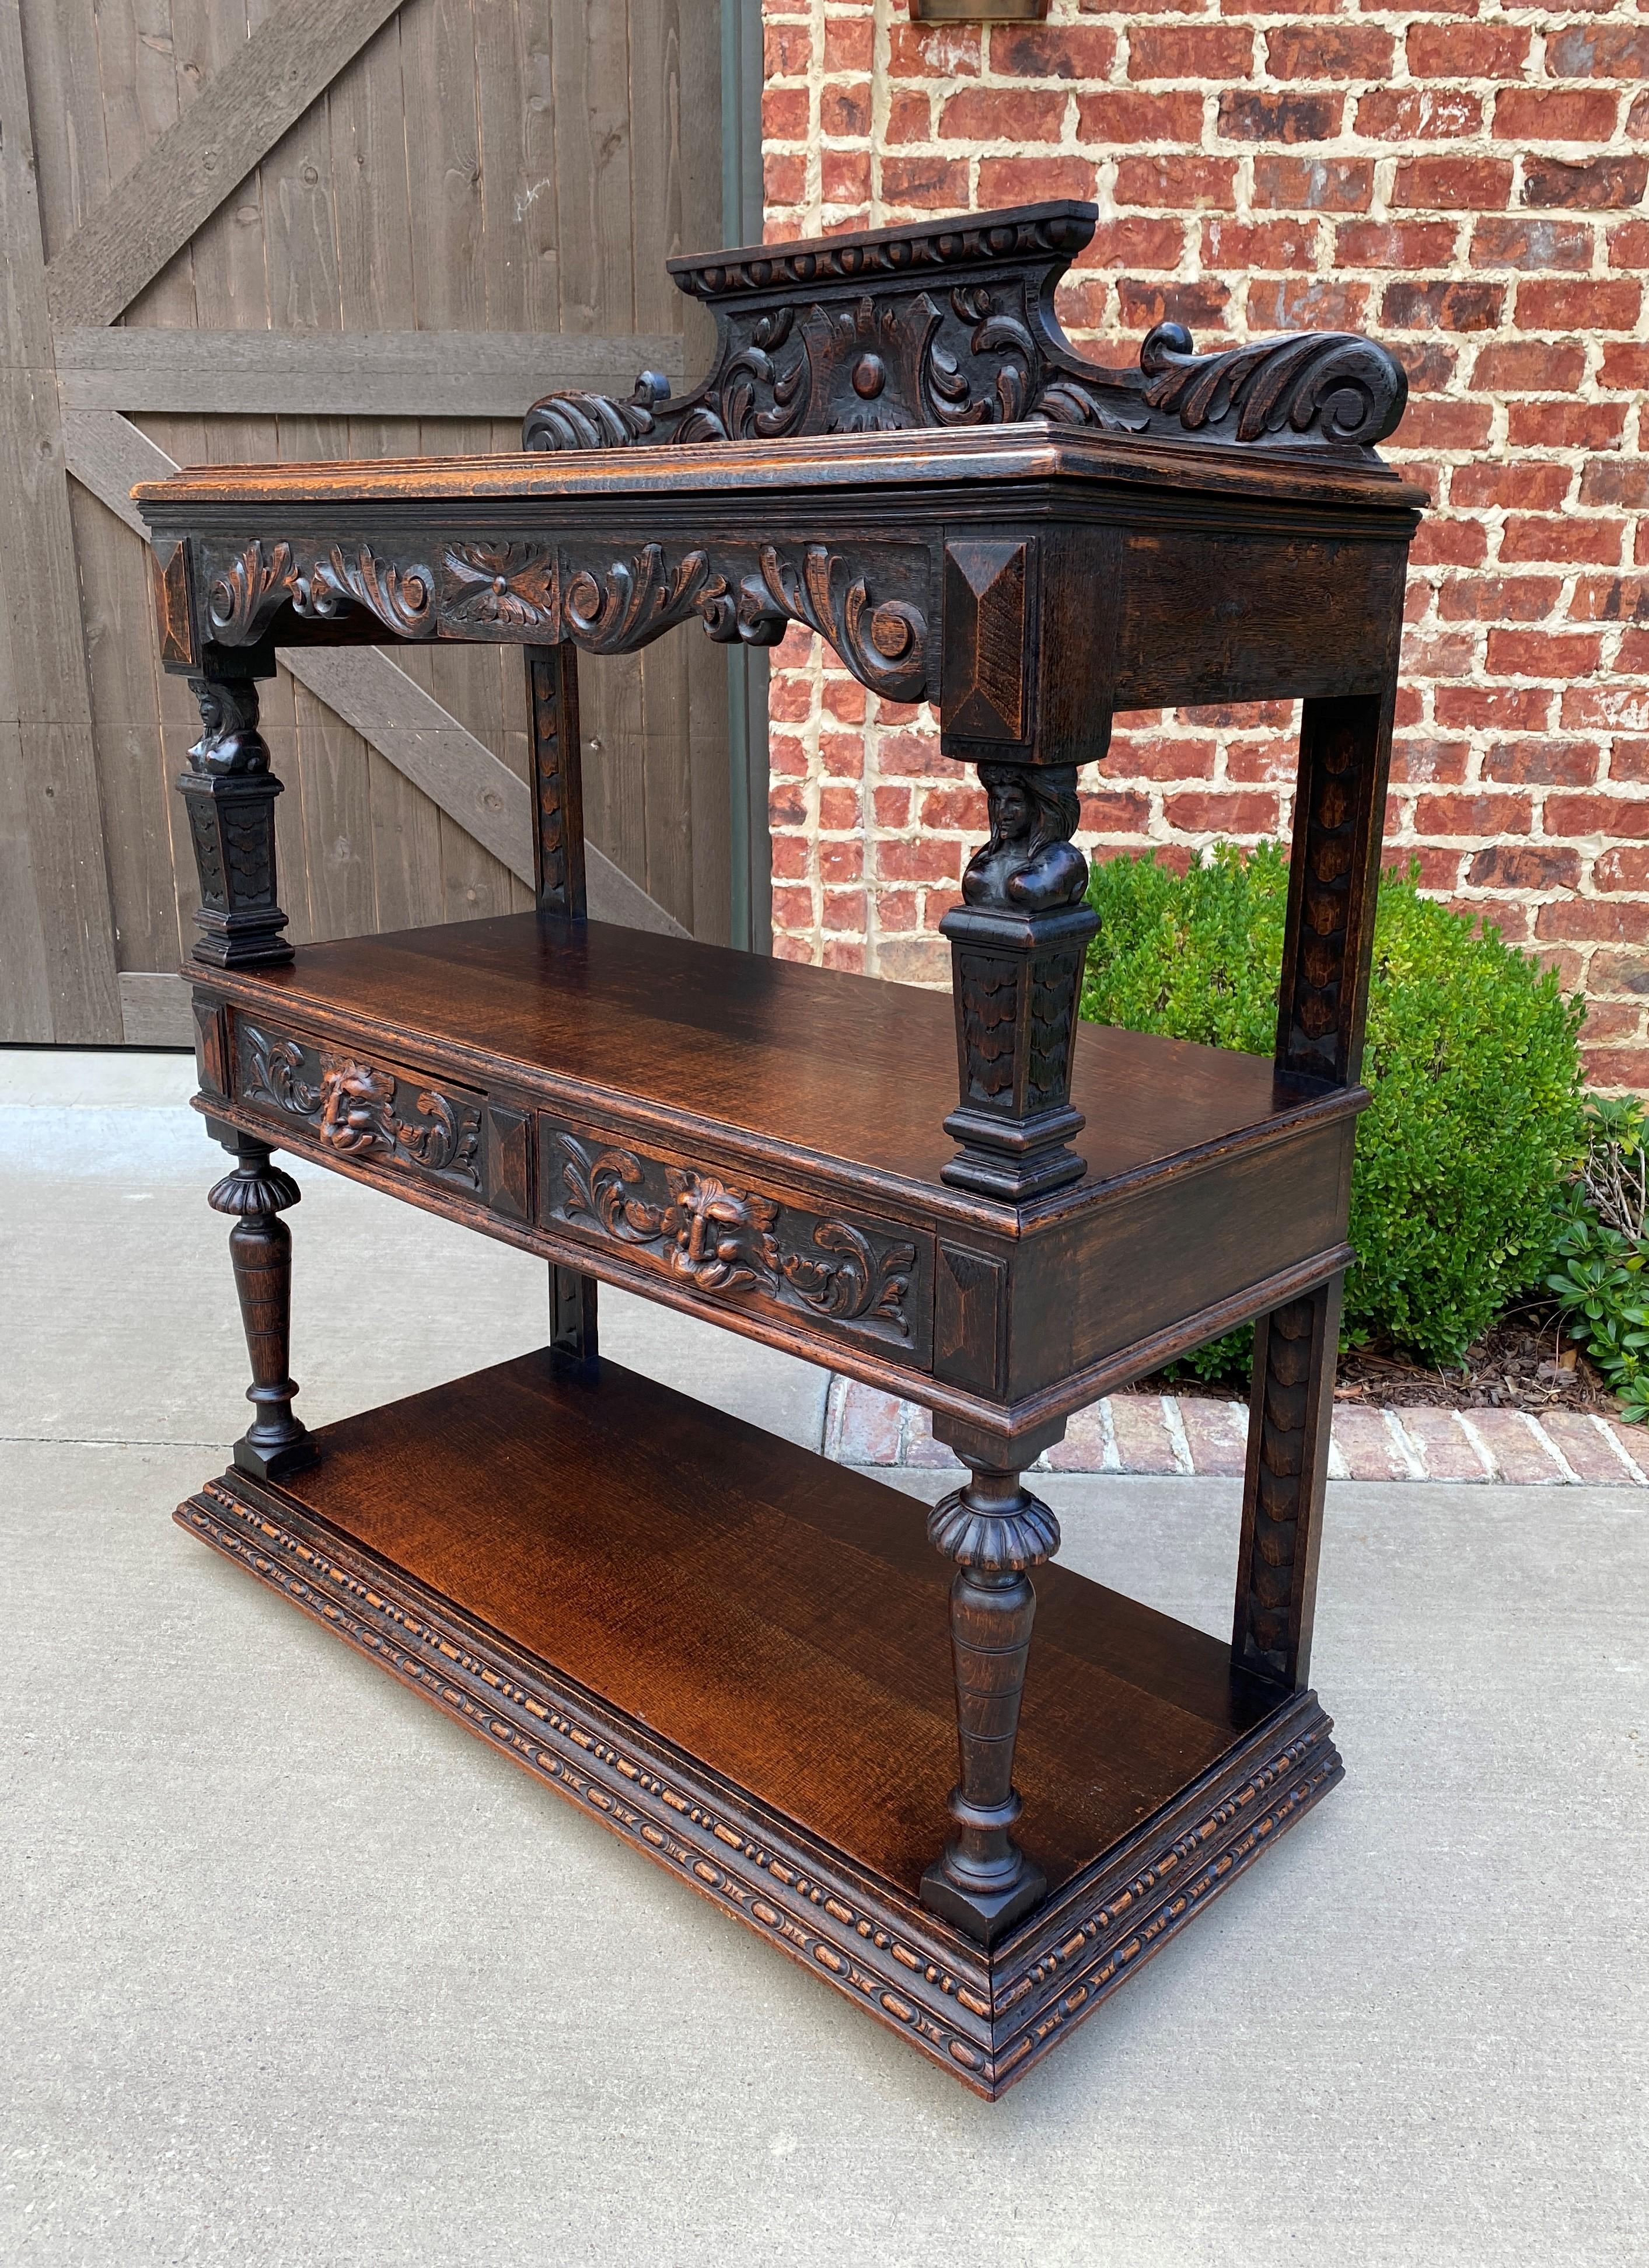 Carved Antique English Server Sideboard Buffet 3-Tier Gothic Revival Oak 2 Drawers 1890